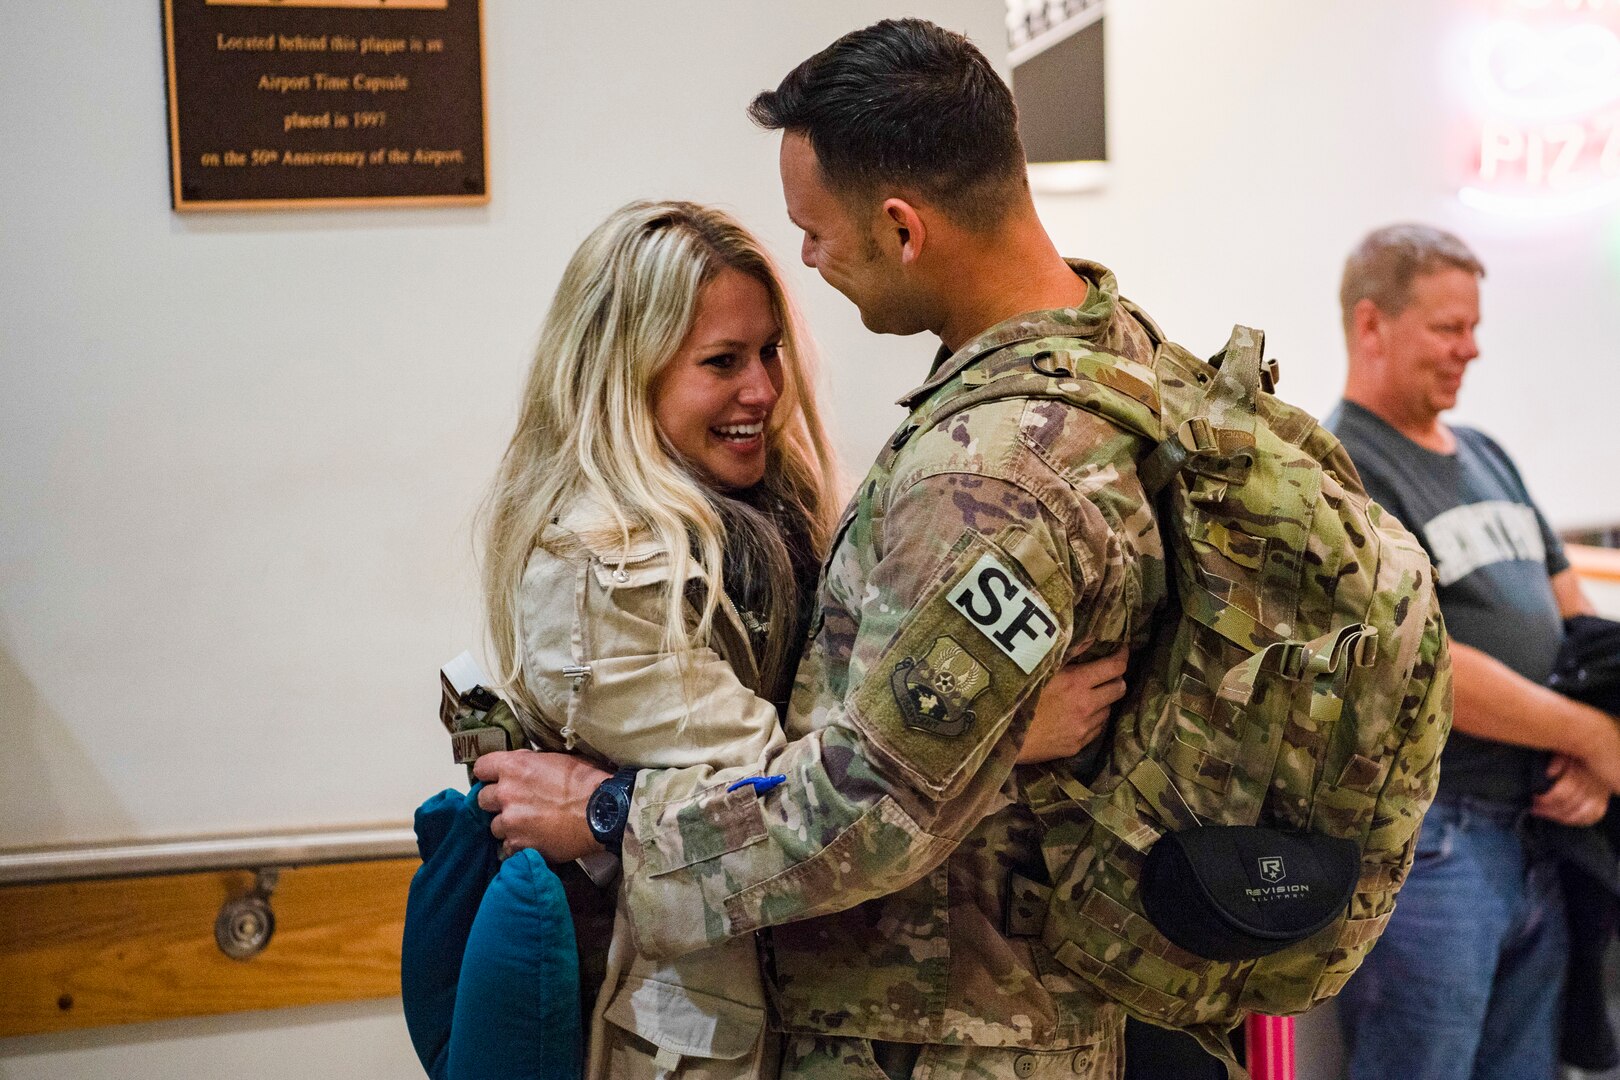 Members of the 130th Airlift Wing Security Forces Squadron embrace members of their family after arriving to Charleston, West Virginia Oct. 15, 2018, following a six month deployment to southwest Asia. (U.S. Air National Guard photo by Airman 1st Class Caleb Vance)